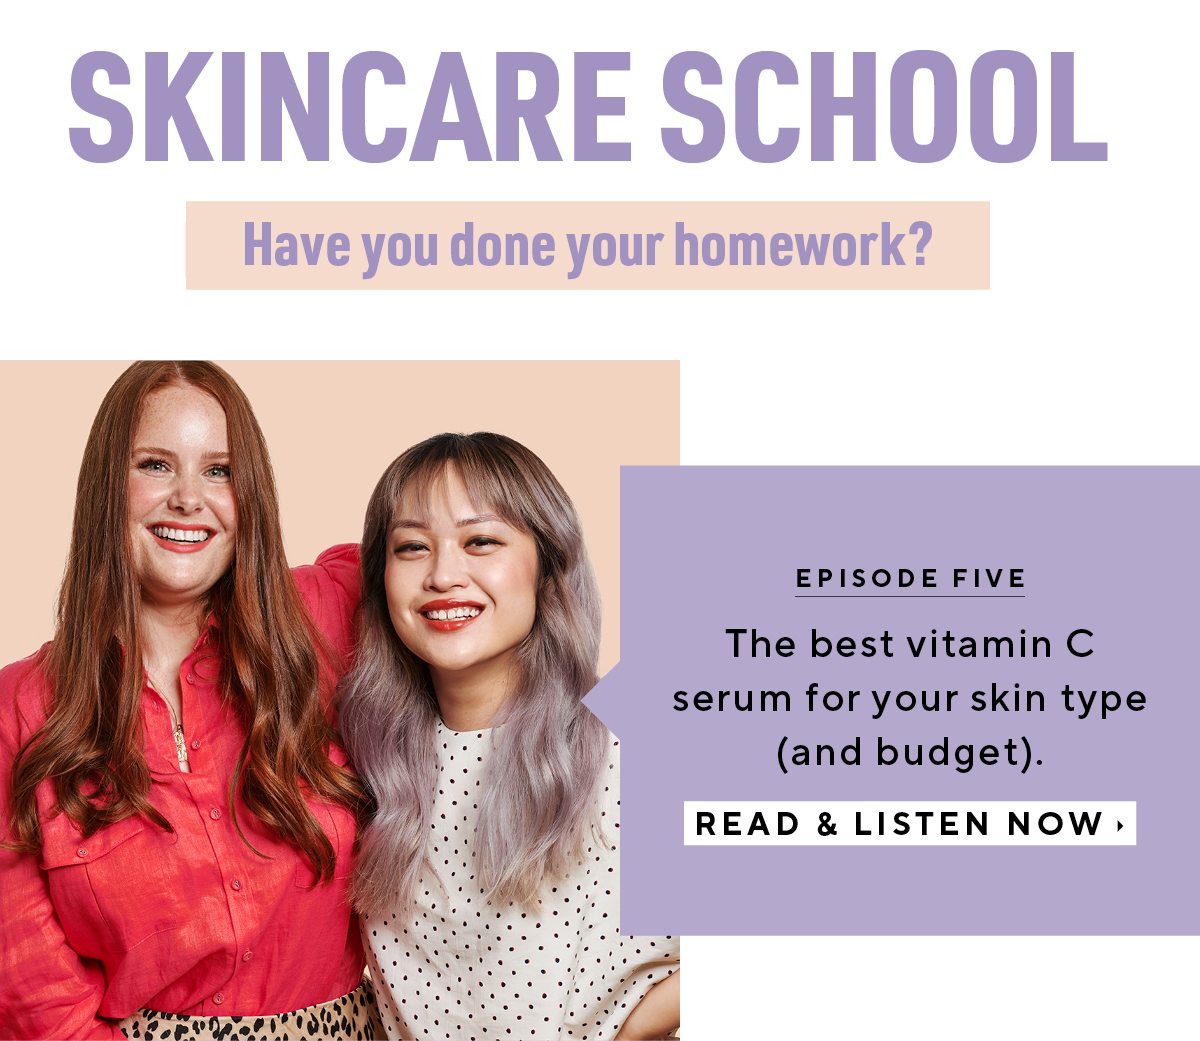 Skincare School | The best vitamin C serum for your skin type (and budget).